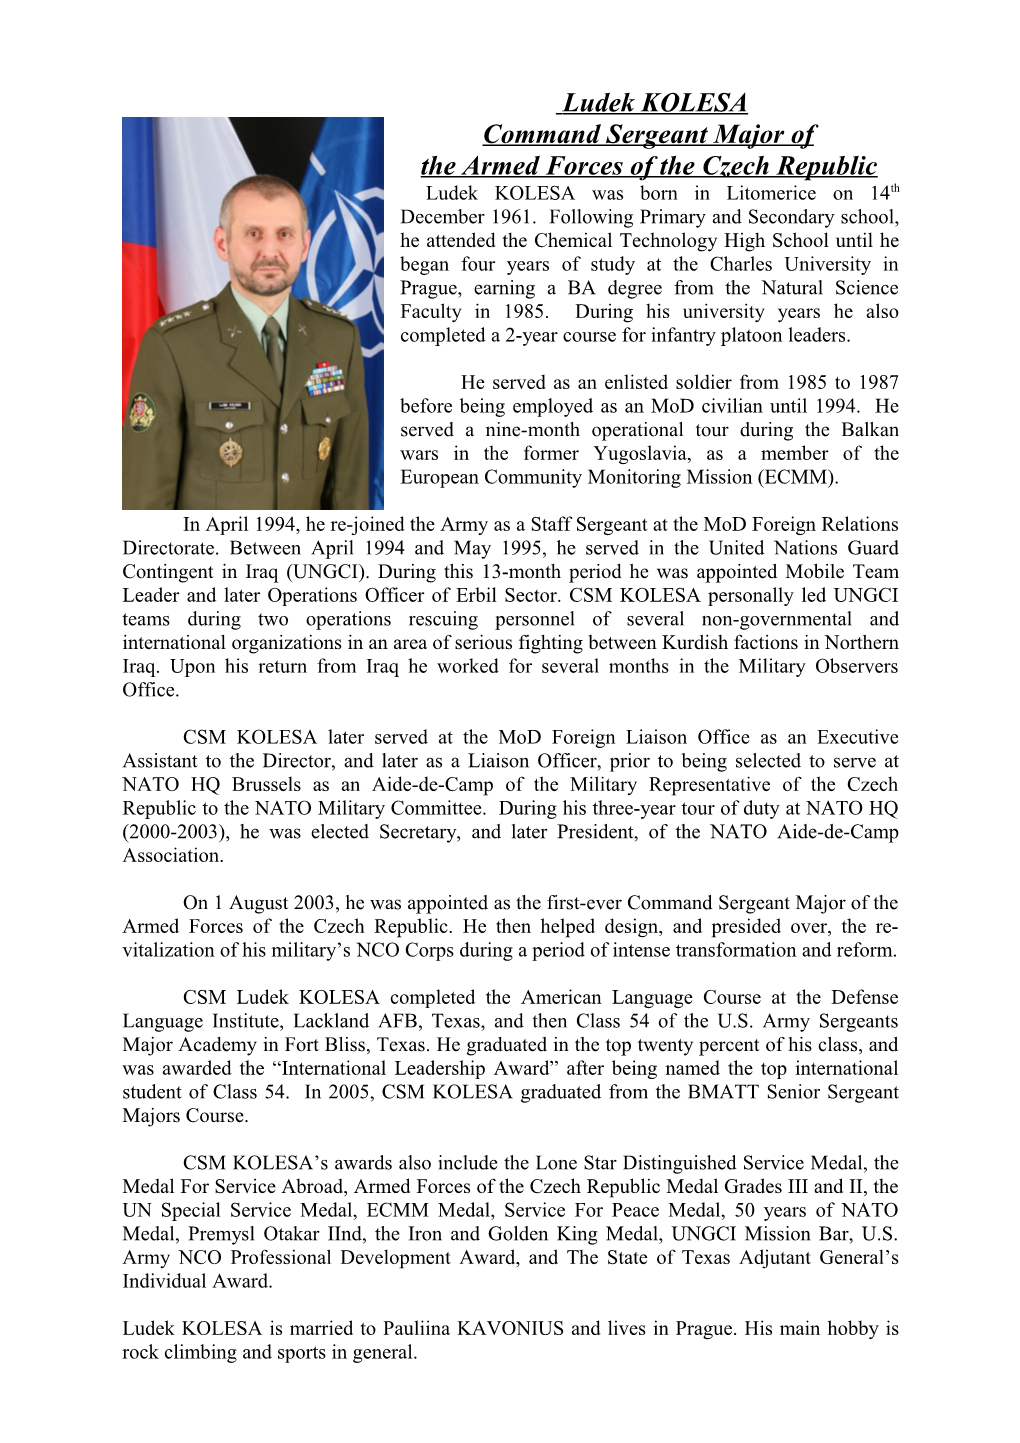 The Armed Forces of the Czech Republic